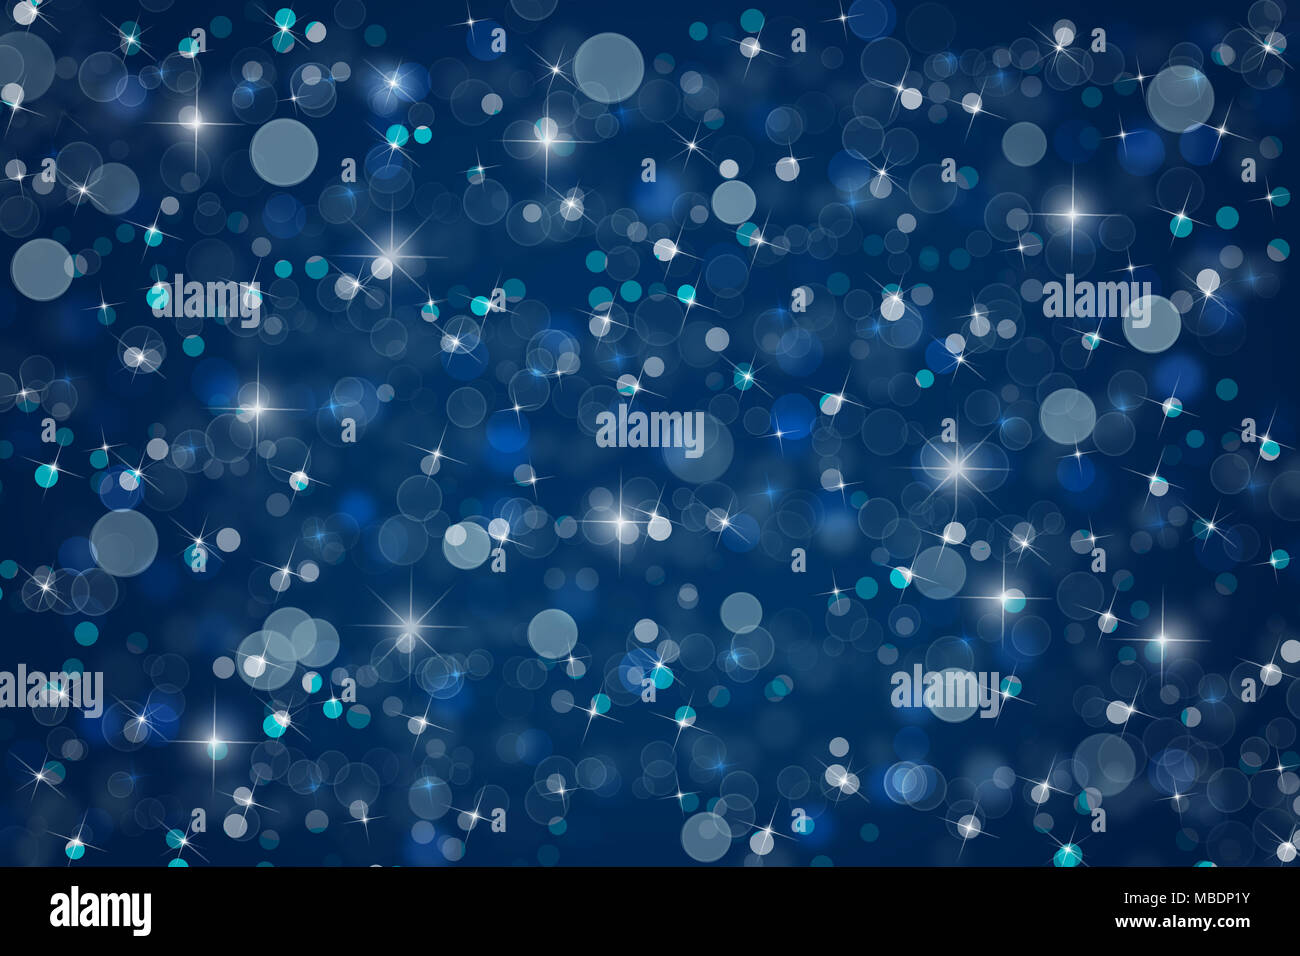 Abstract dark indigo blue Christmas holiday winter background of falling snow bokeh, sparkles and glitter Stock Photo